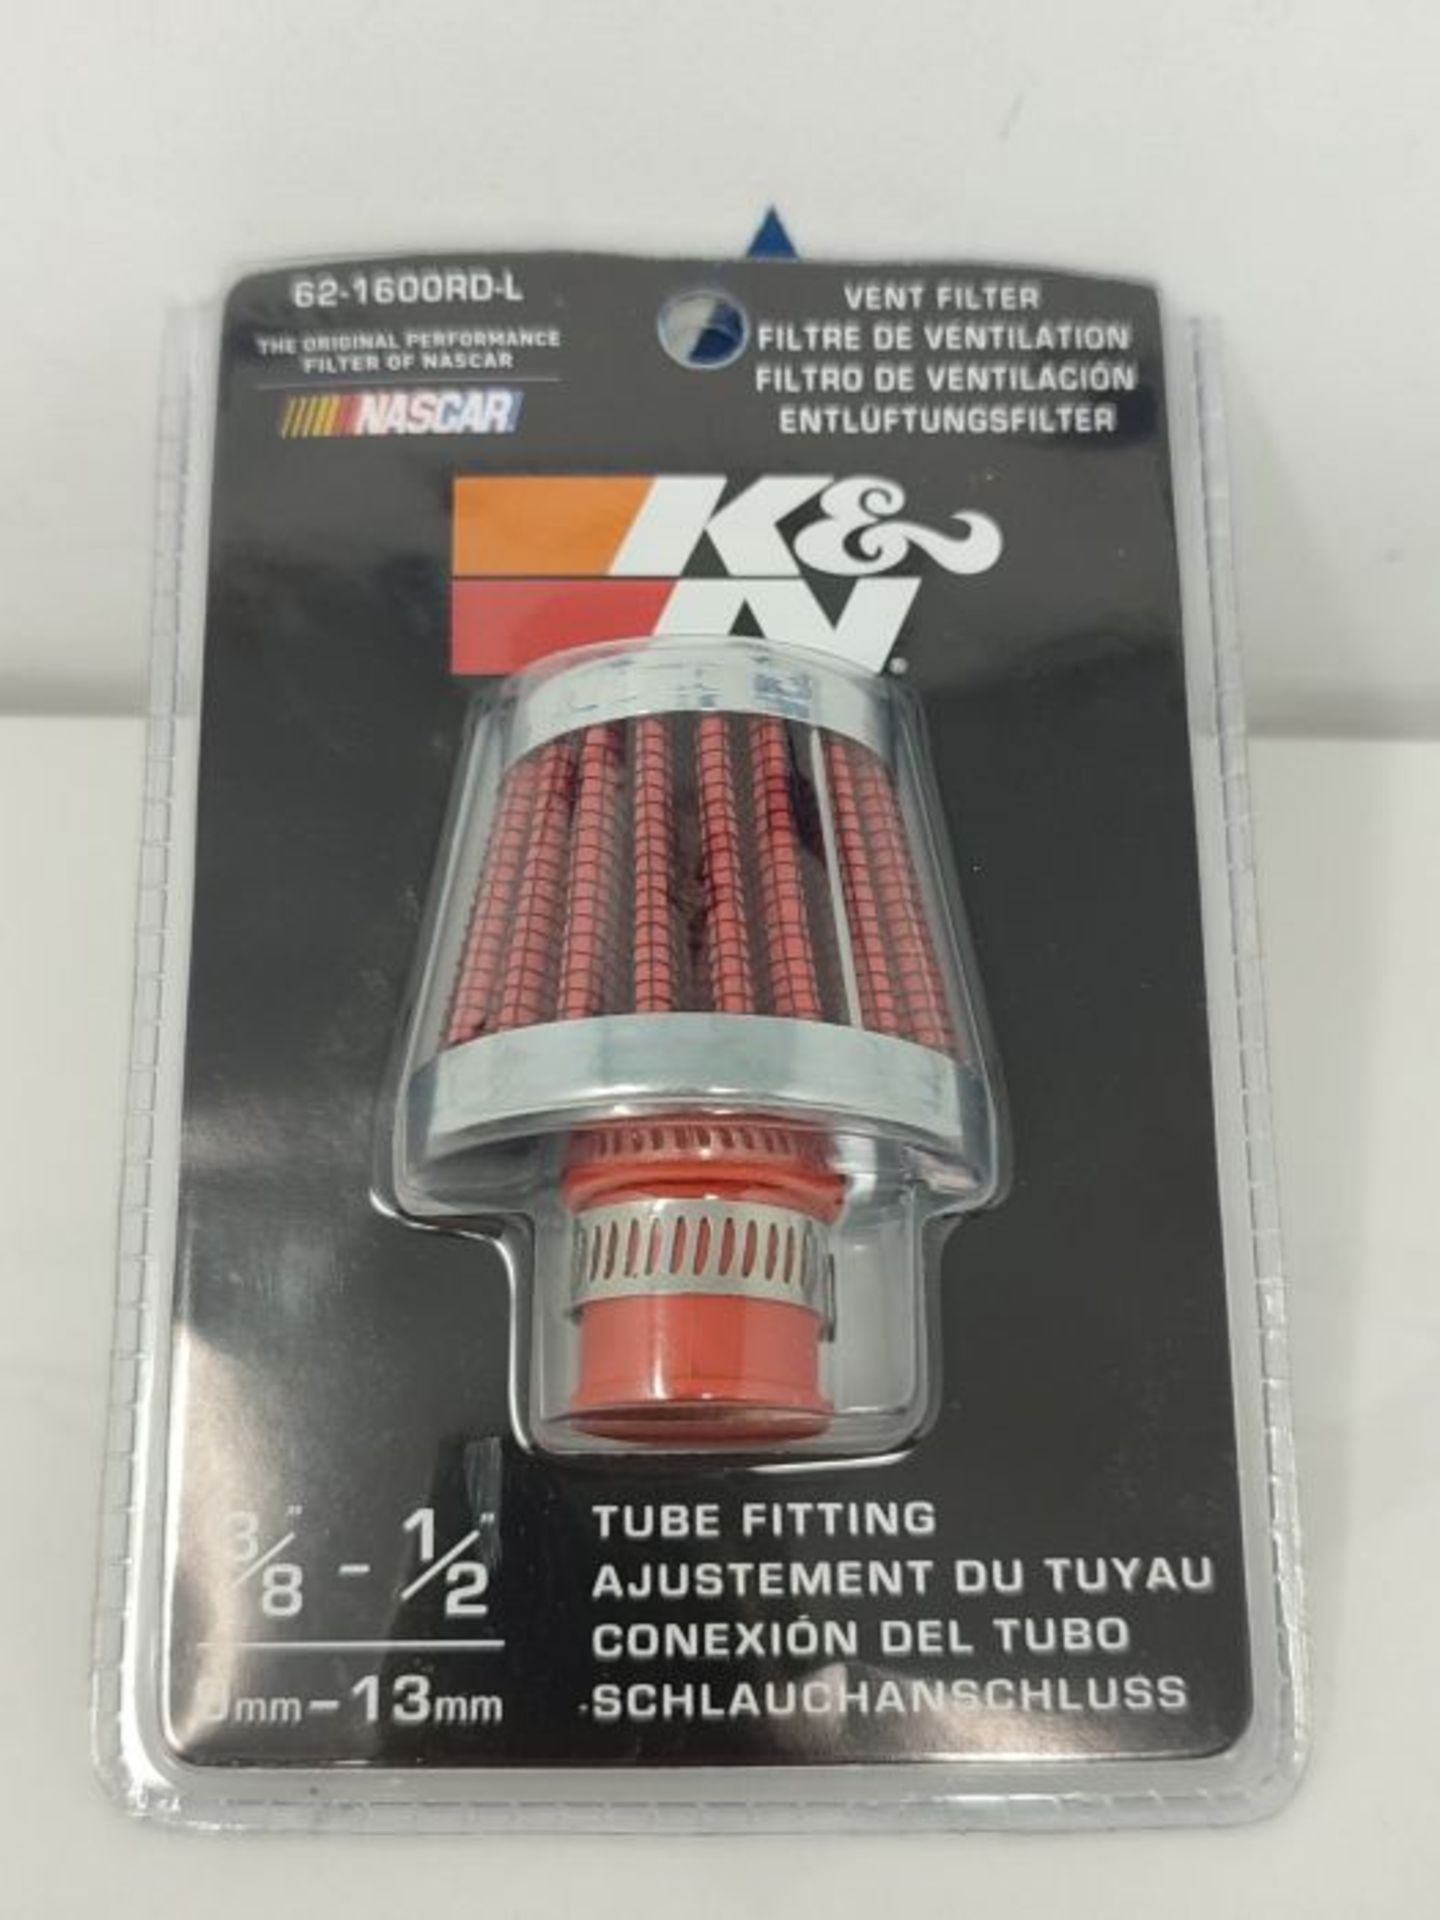 K&N Filters 62-1600RD-L Car and Motorcycle Vent Air Filter - Image 2 of 3